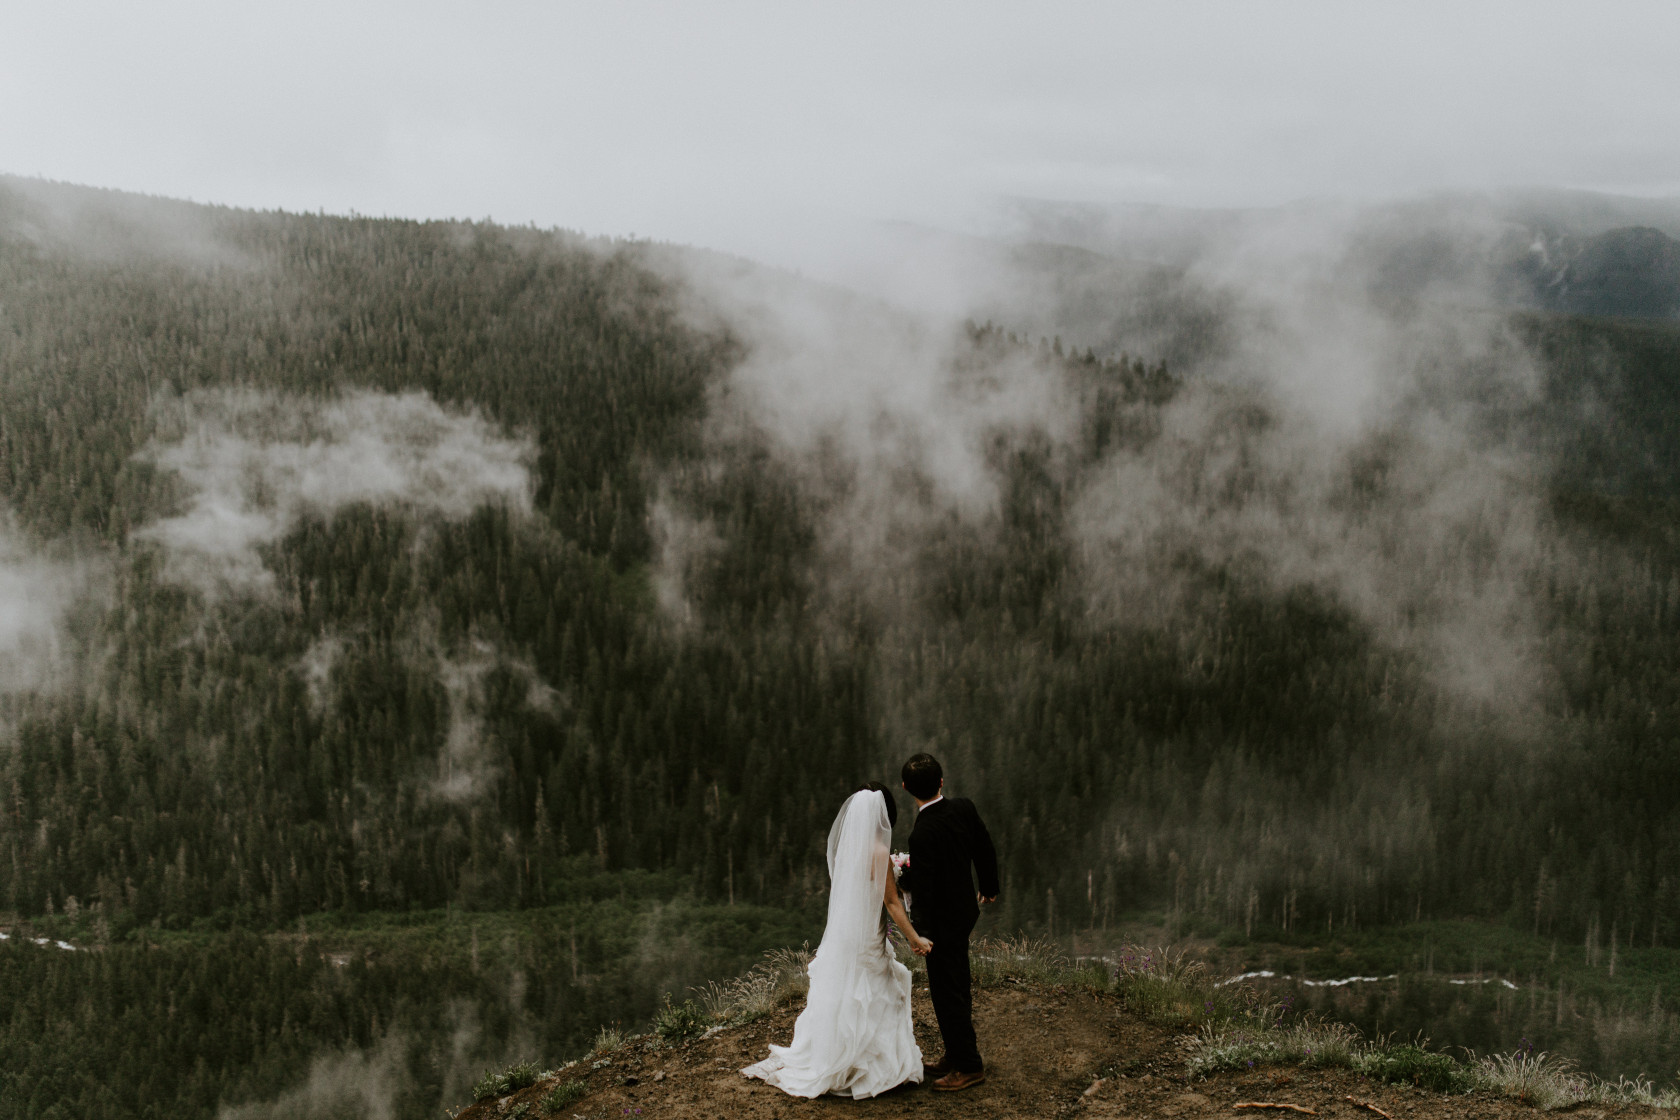 Valerie and Alex look out at the view near  Mount Hood, OR. Elopement wedding photography at Mount Hood by Sienna Plus Josh.